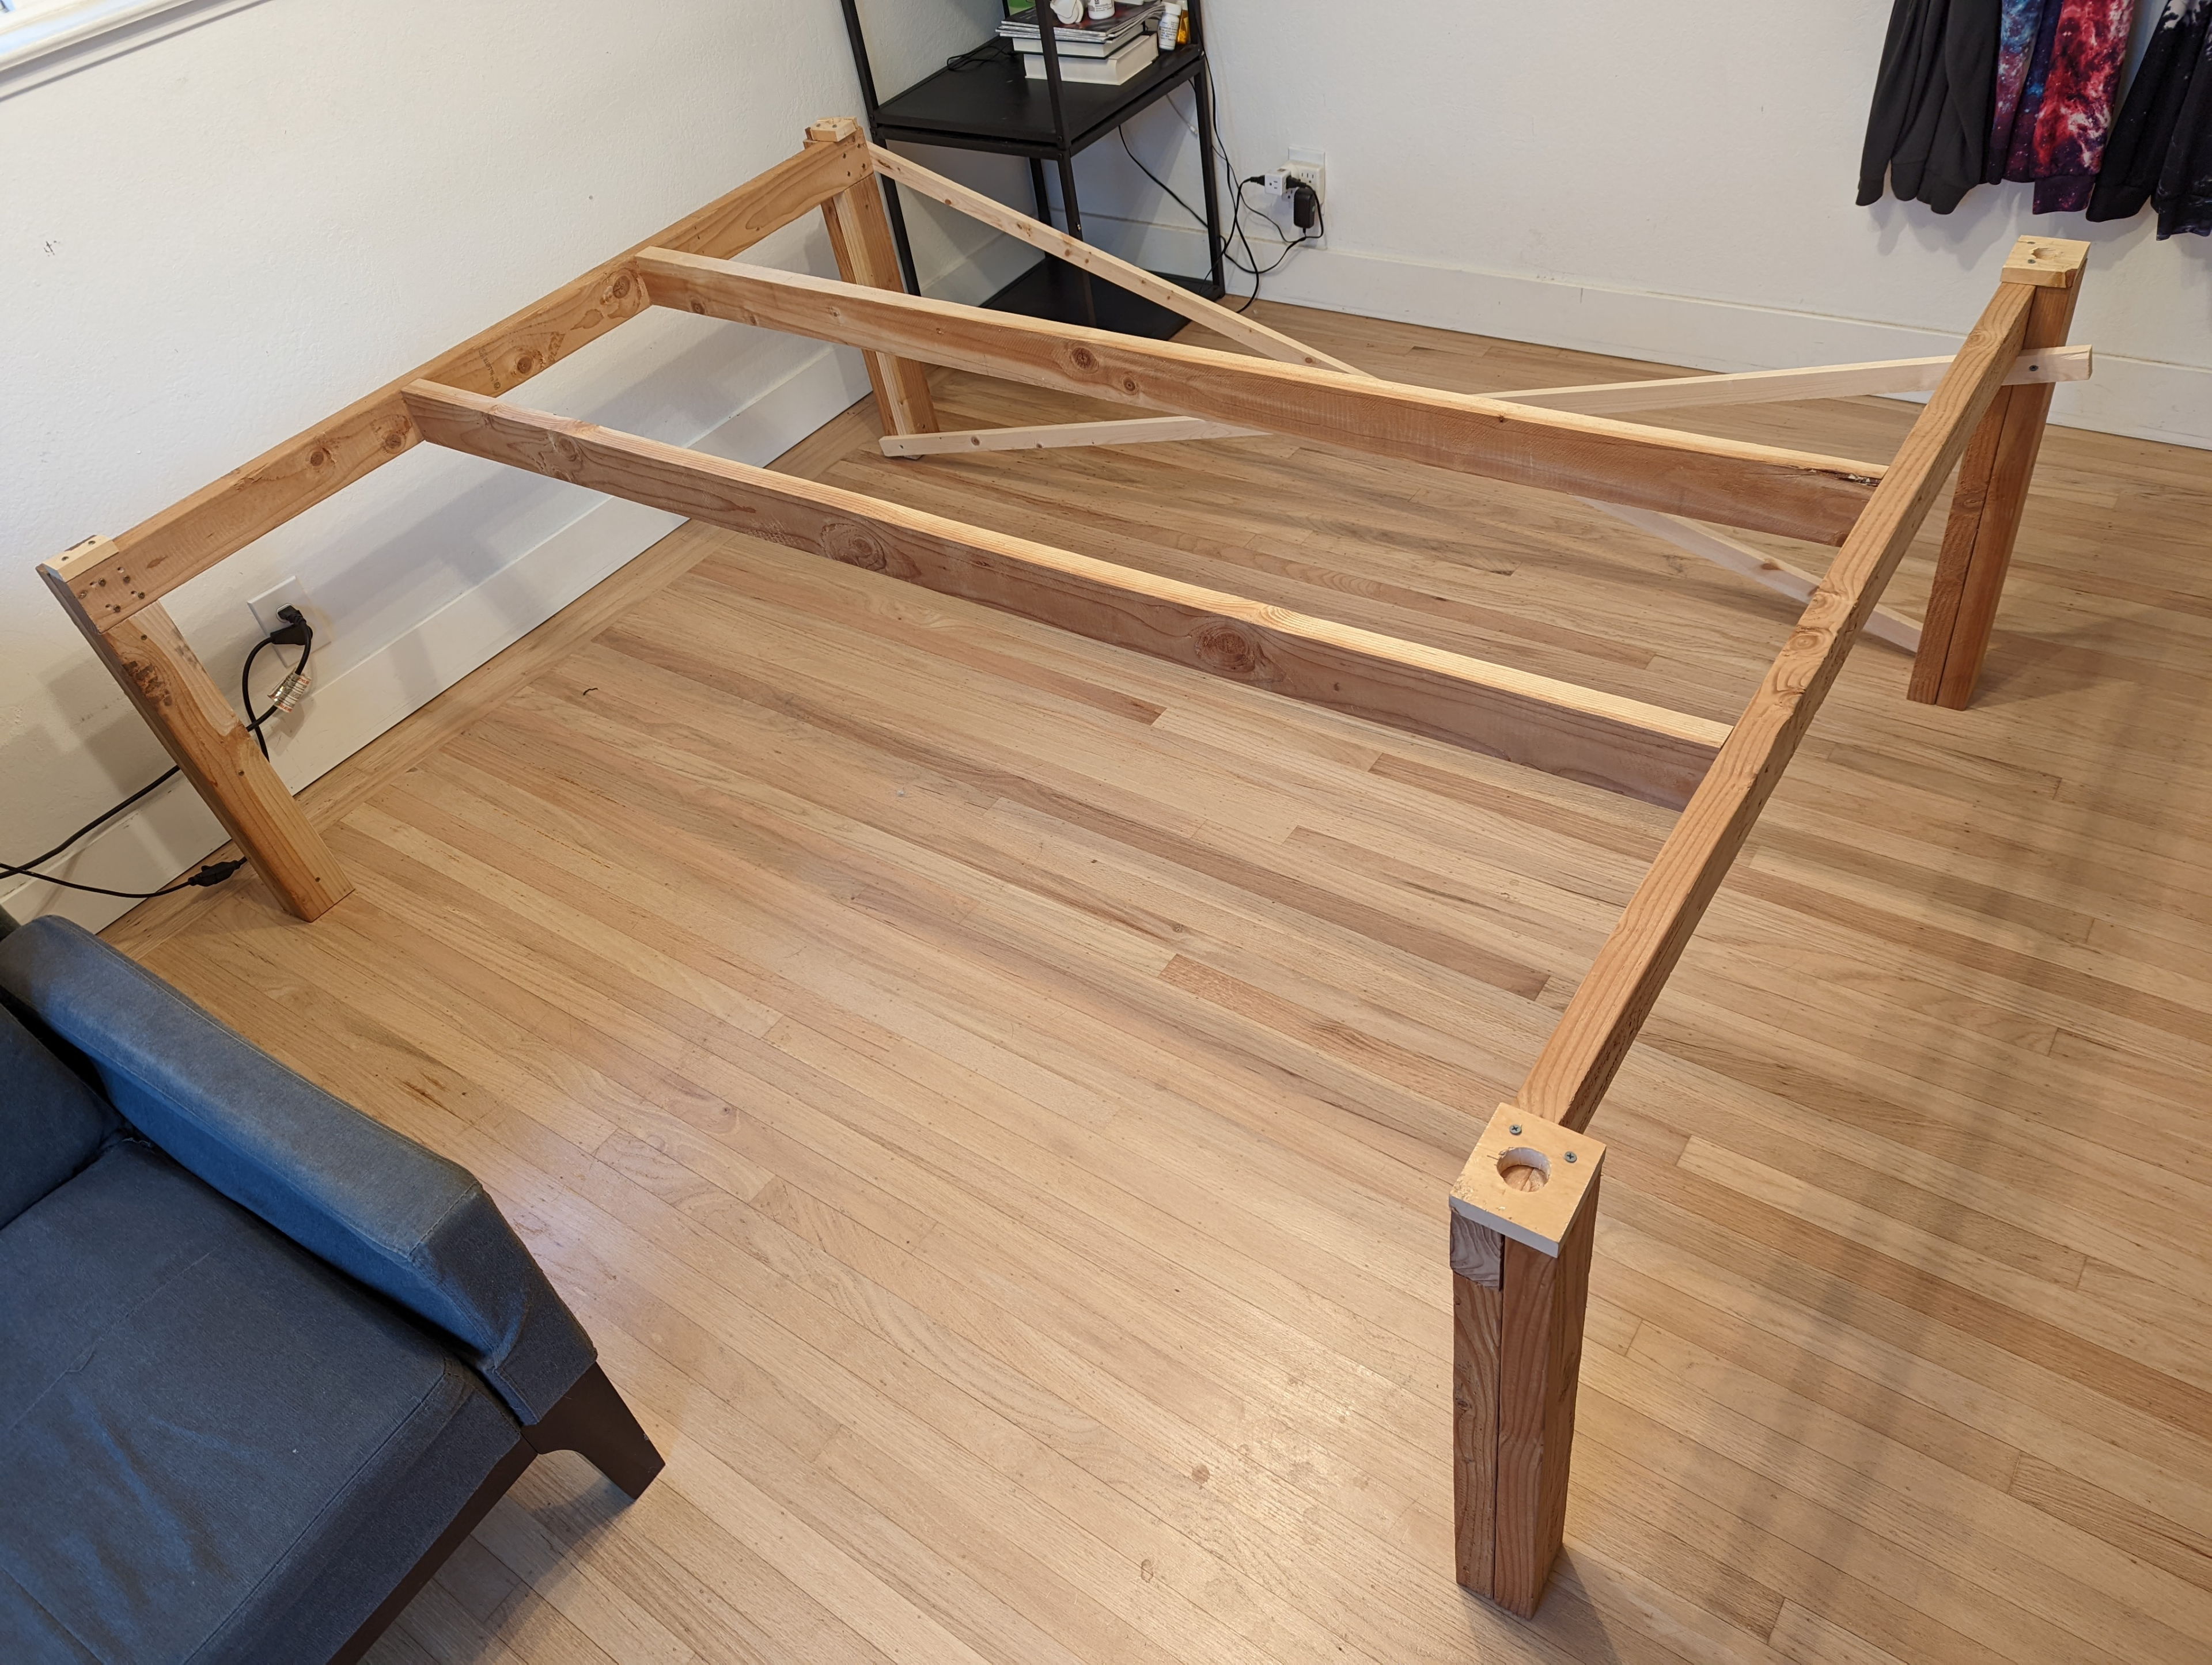 The temporary loft frame that served us well for almost six months.